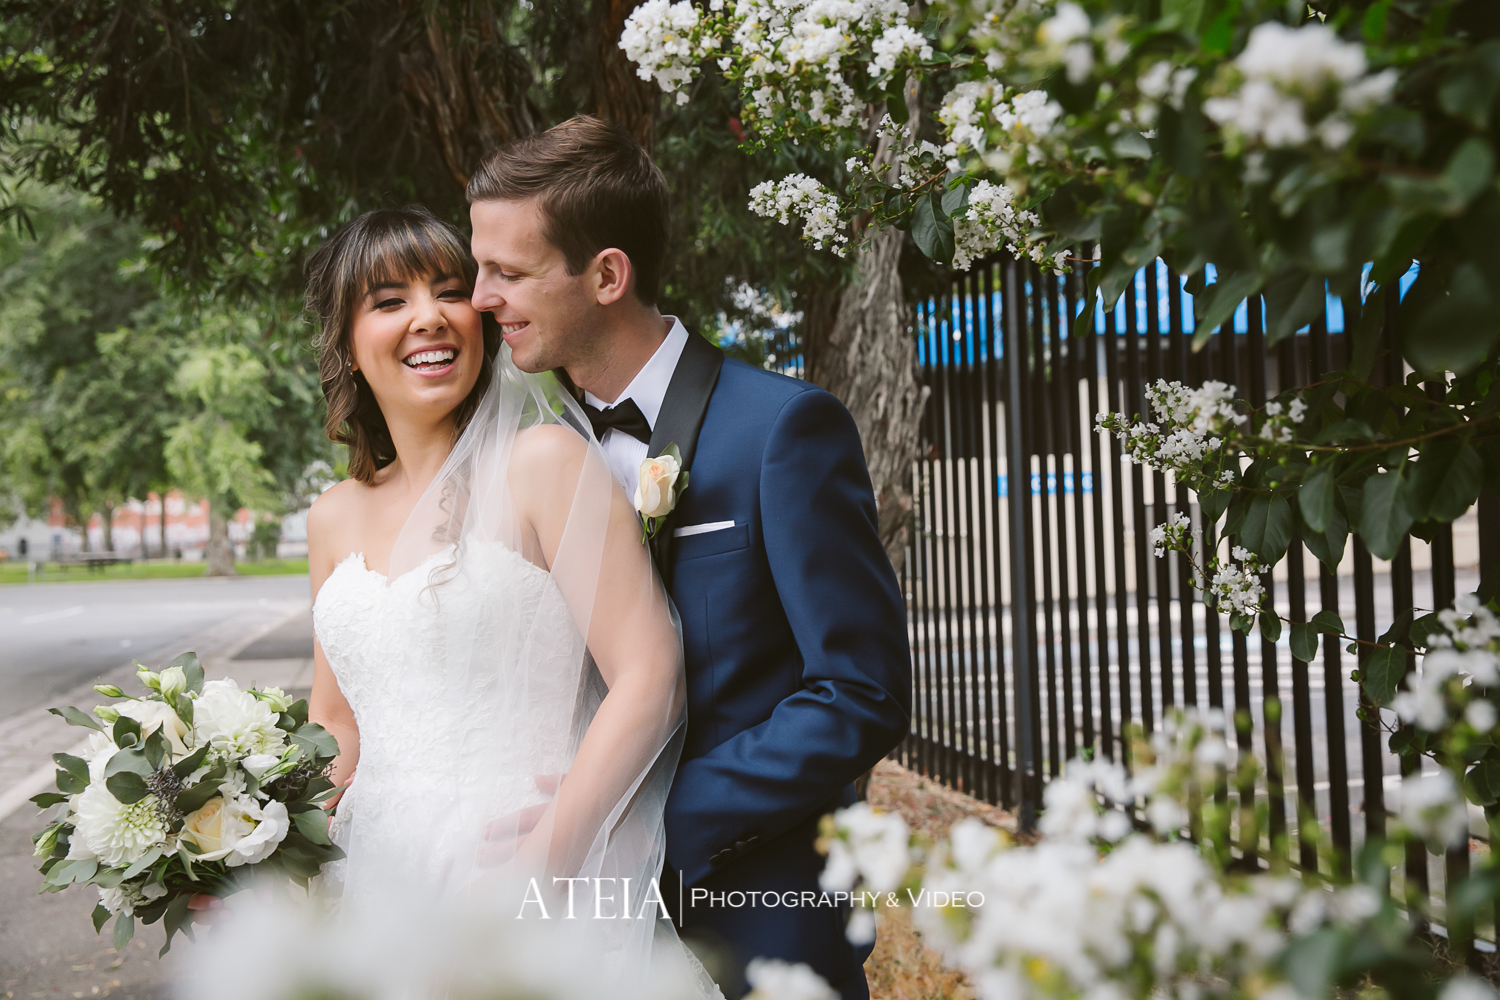 , TwoTonMax Wedding Photography Melbourne by ATEIA Photography &#038; Video